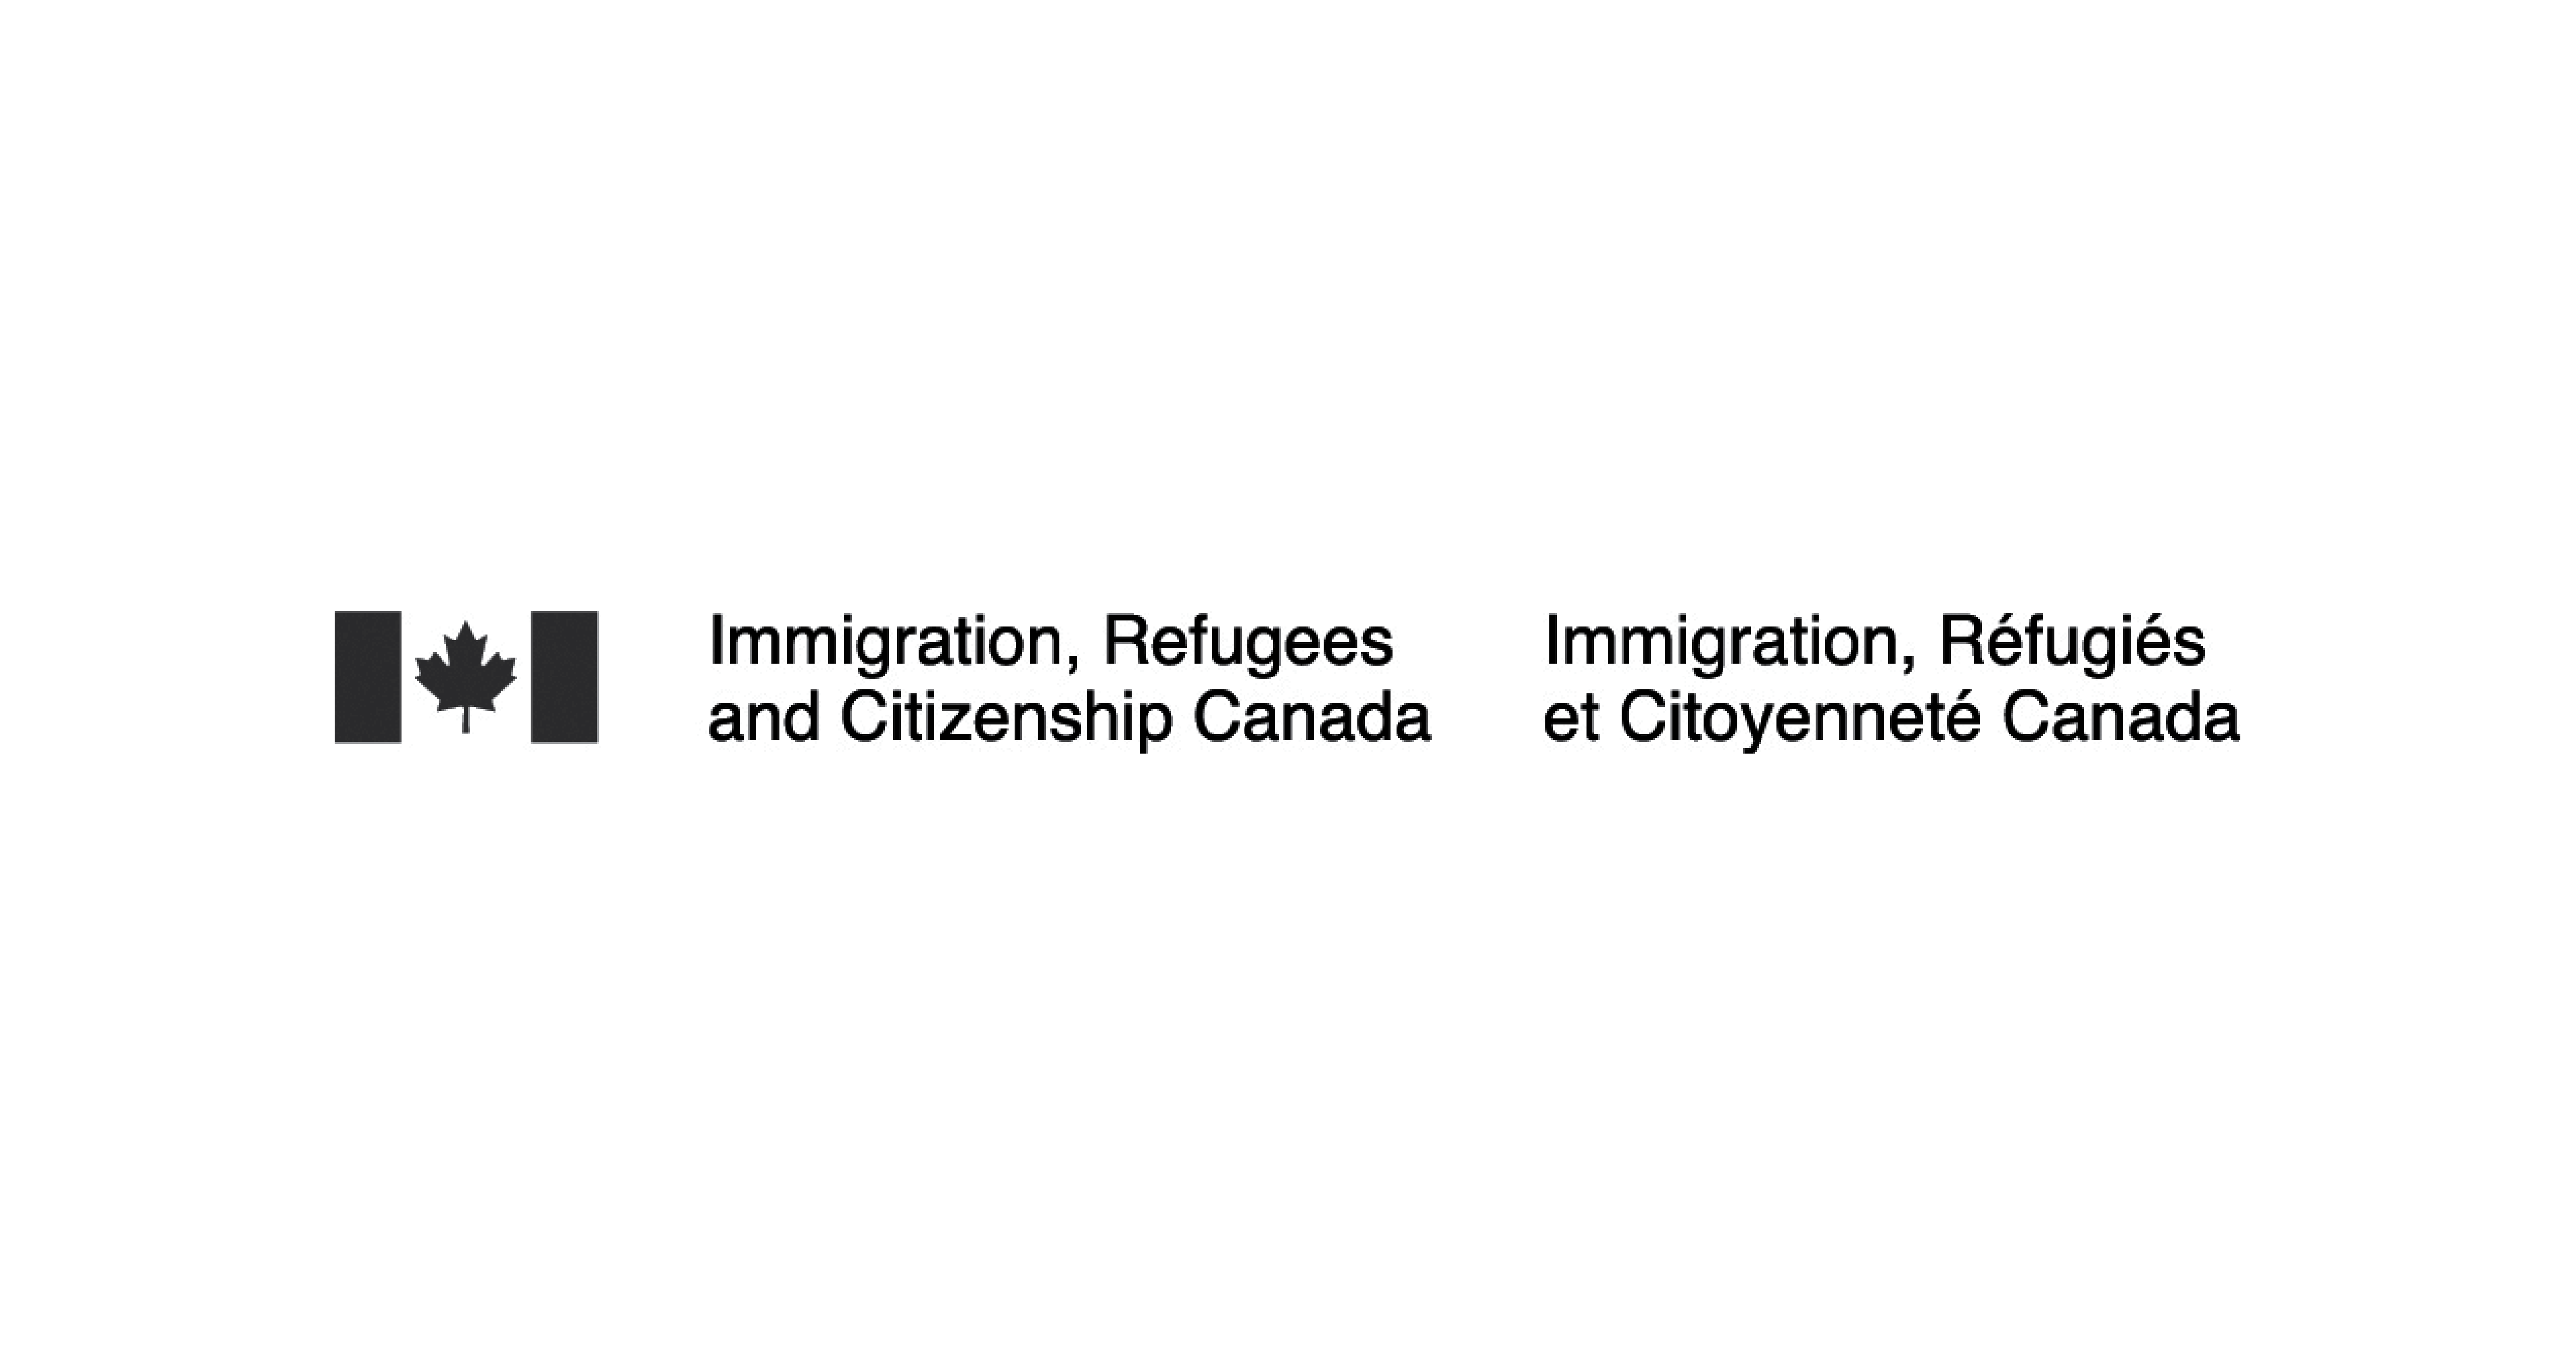 Partner Immigration Refugees and Citizenship Canada